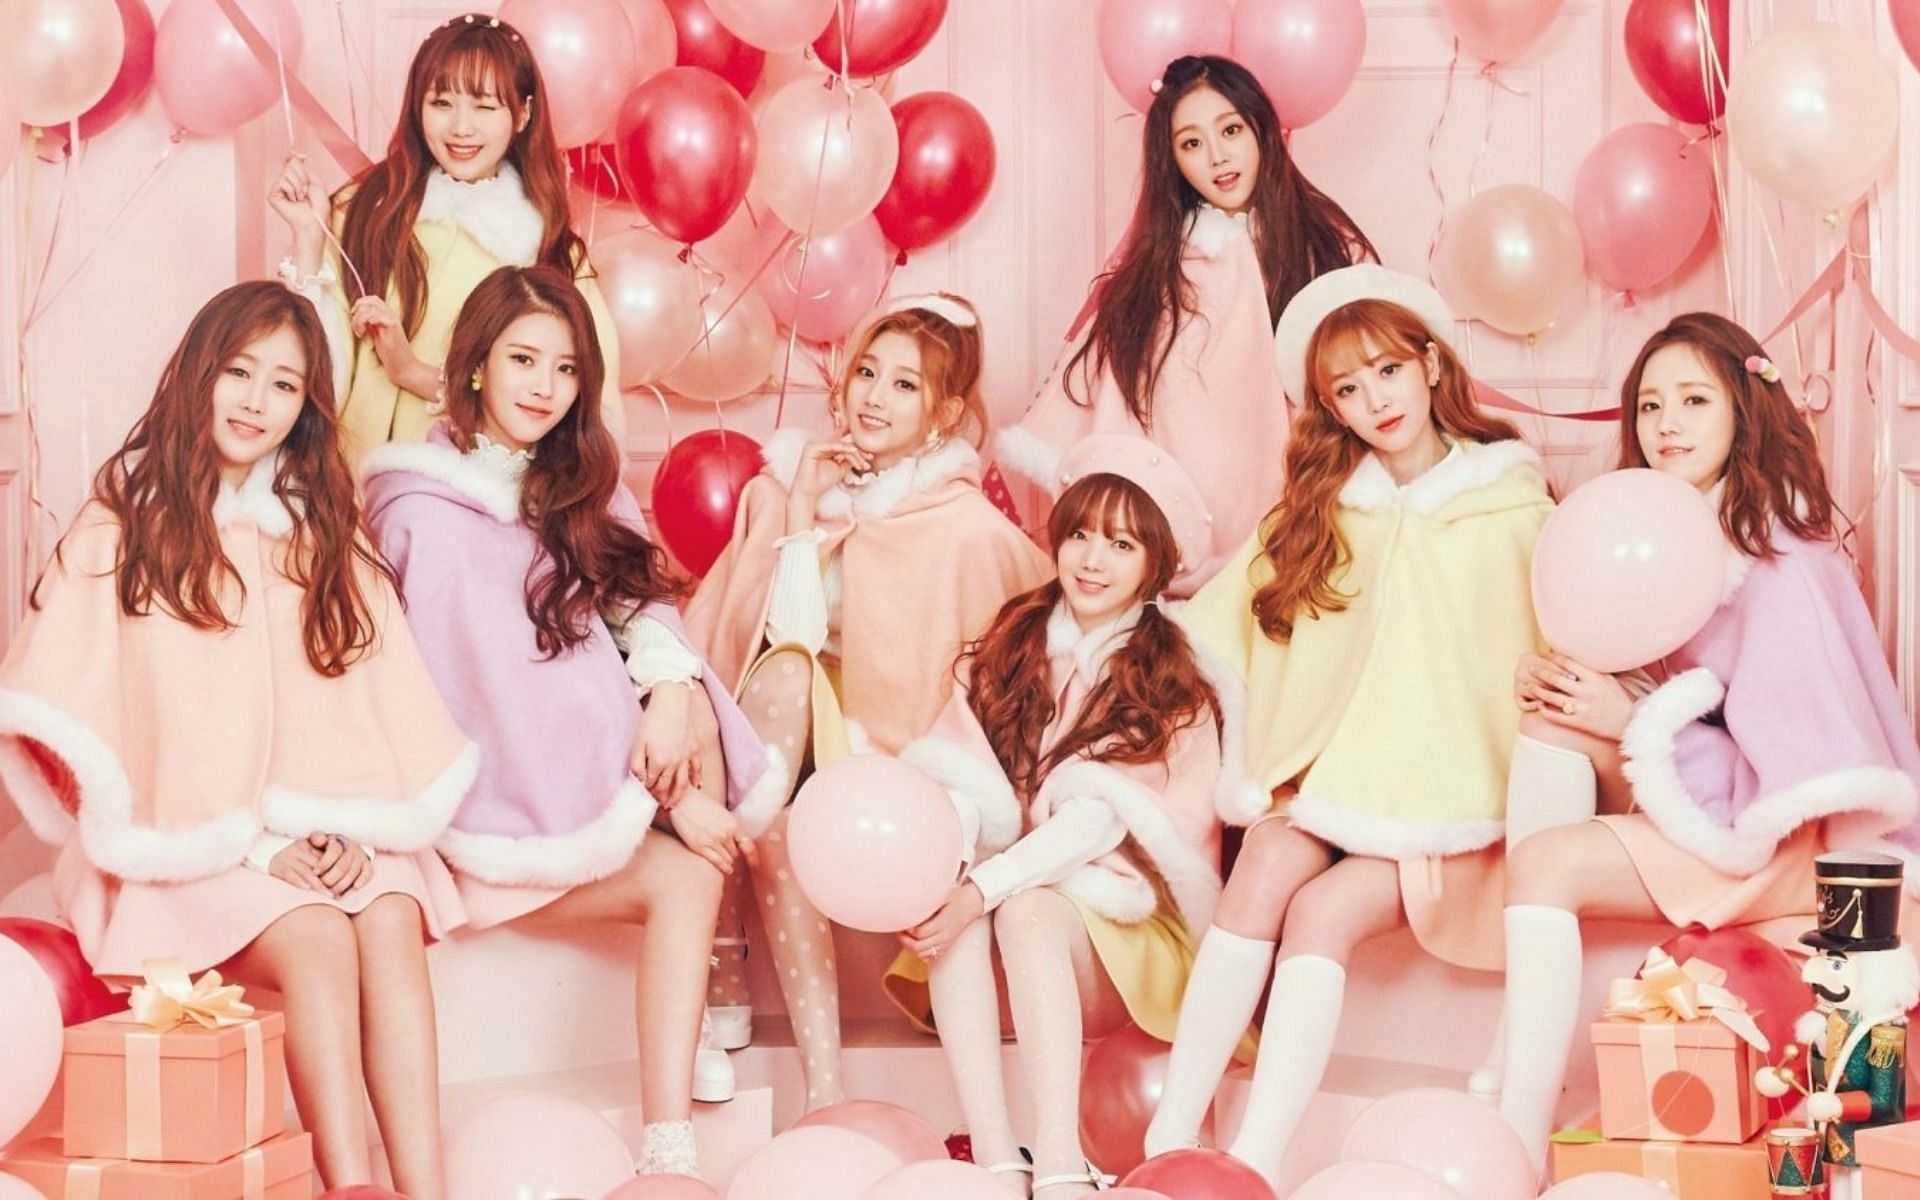 Members of Lovelyz hint at their frustration regarding the group&#039;s future (Image via Woollim Entertainment)